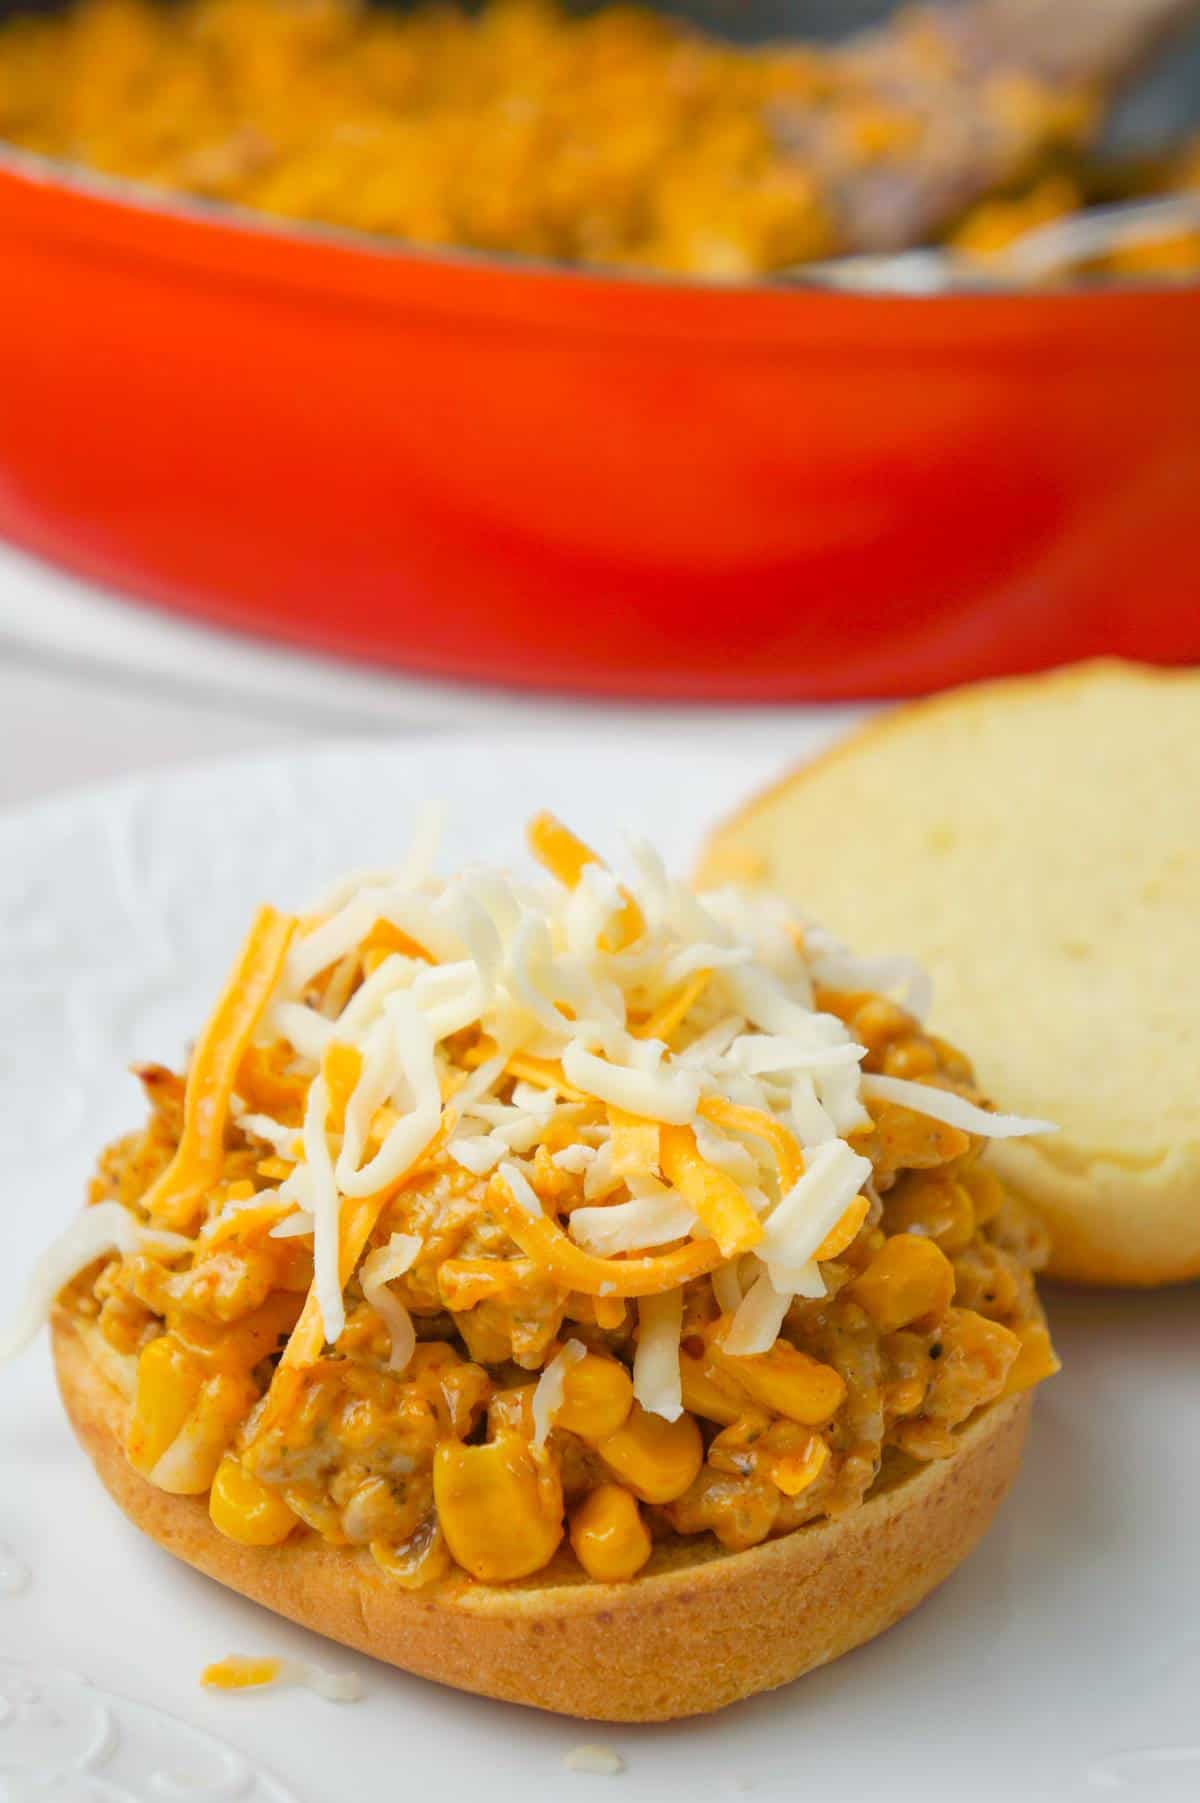 Cajun Chicken Sloppy Joes are an easy dinner recipe using ground chicken and loaded with corn, red onions, cream of chicken soup, Cajun seasoning and shredded cheese.